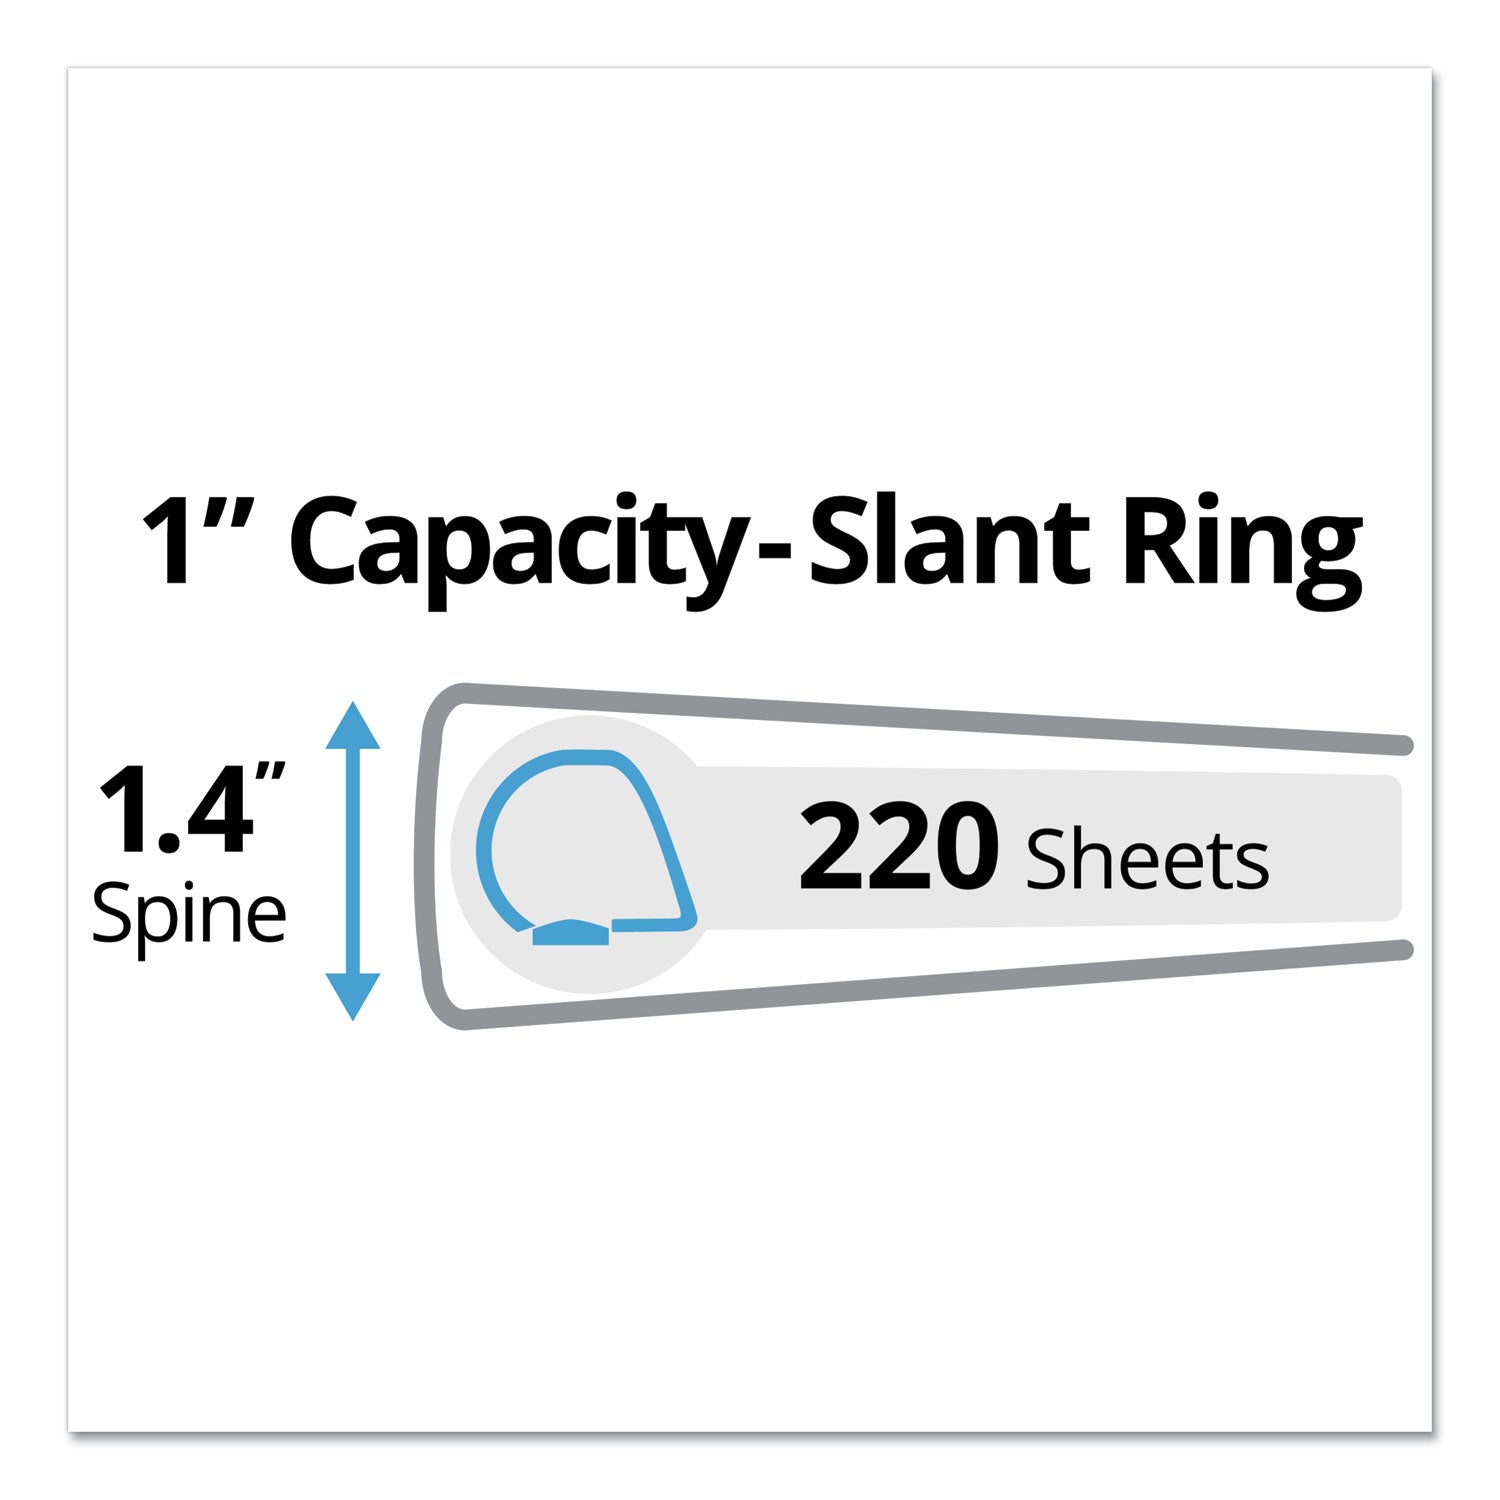 Durable Non-View Binder with DuraHinge and Slant Rings, 3 Rings, 1" Capacity, 11 x 8.5, Green - 